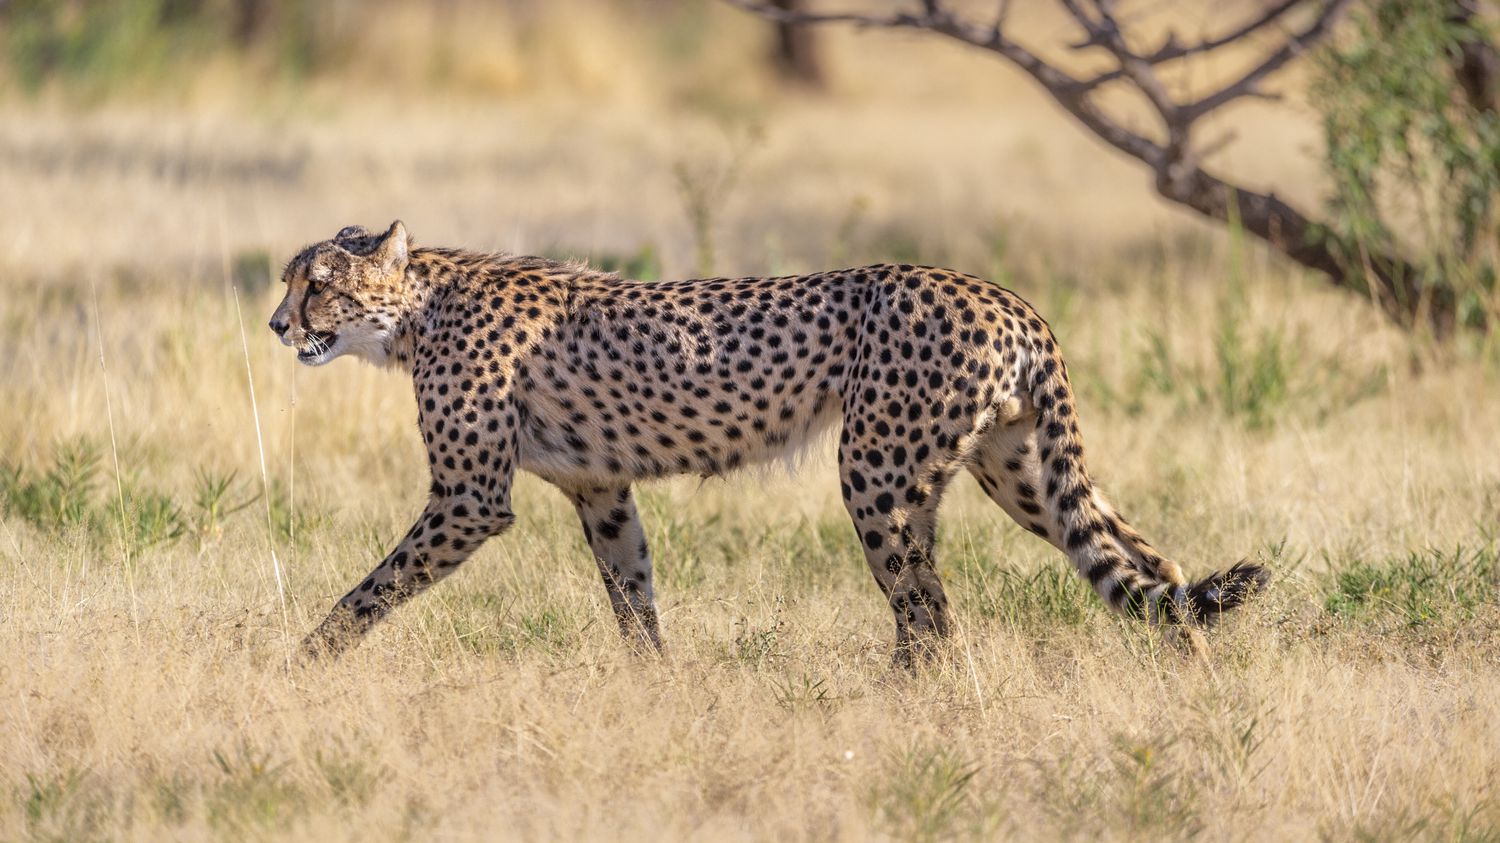 India will reintroduce the cheetah from Africa to "revive the ecological dynamics of the landscape"
